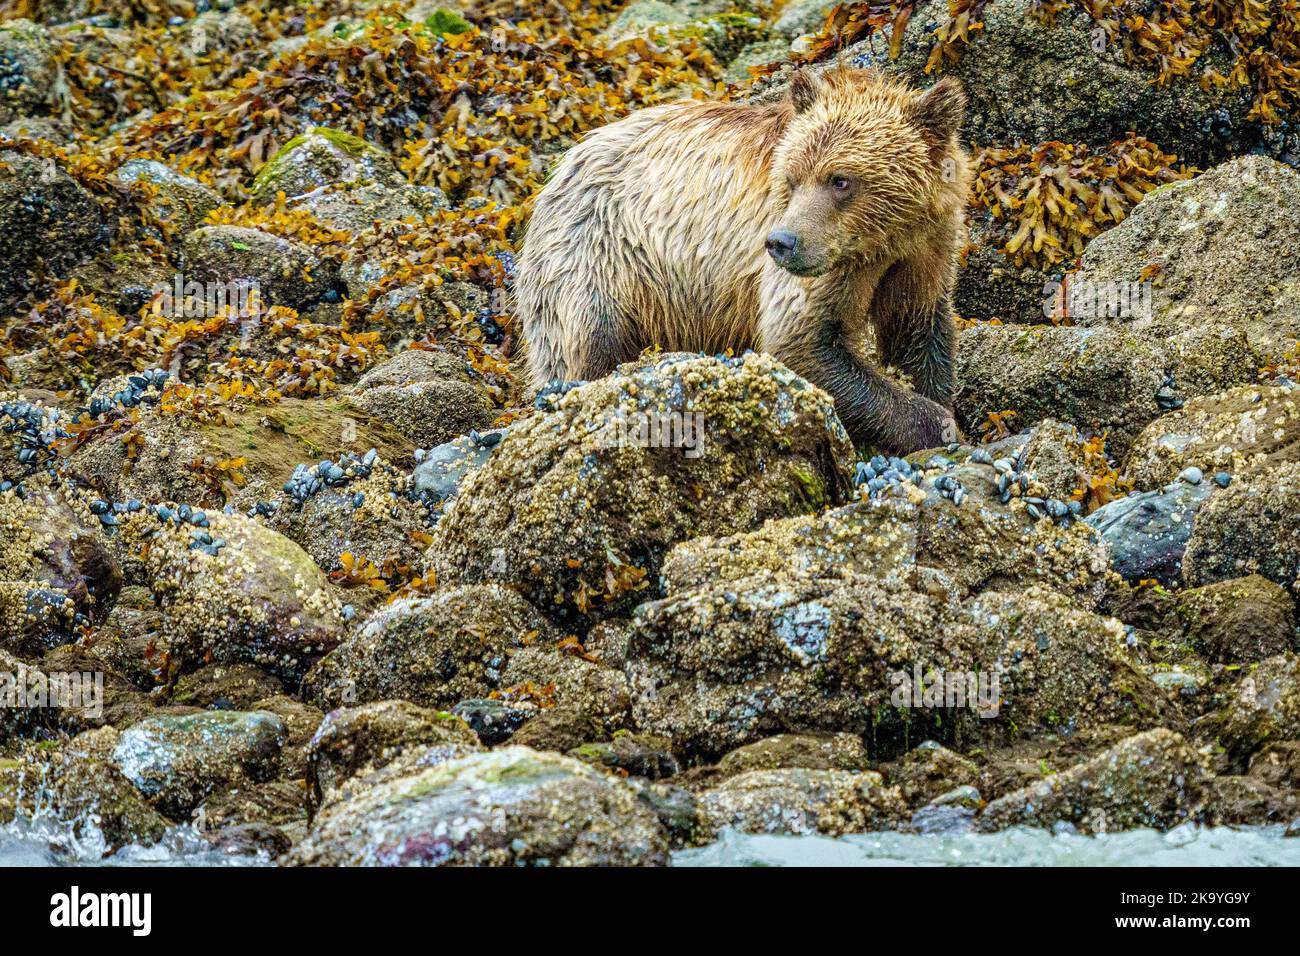 Grizzly bear cub foraging along the low tide line in Glendale Cove in Knight Inlet, First Nations Territory, British Columbia, Canada. Stock Photo